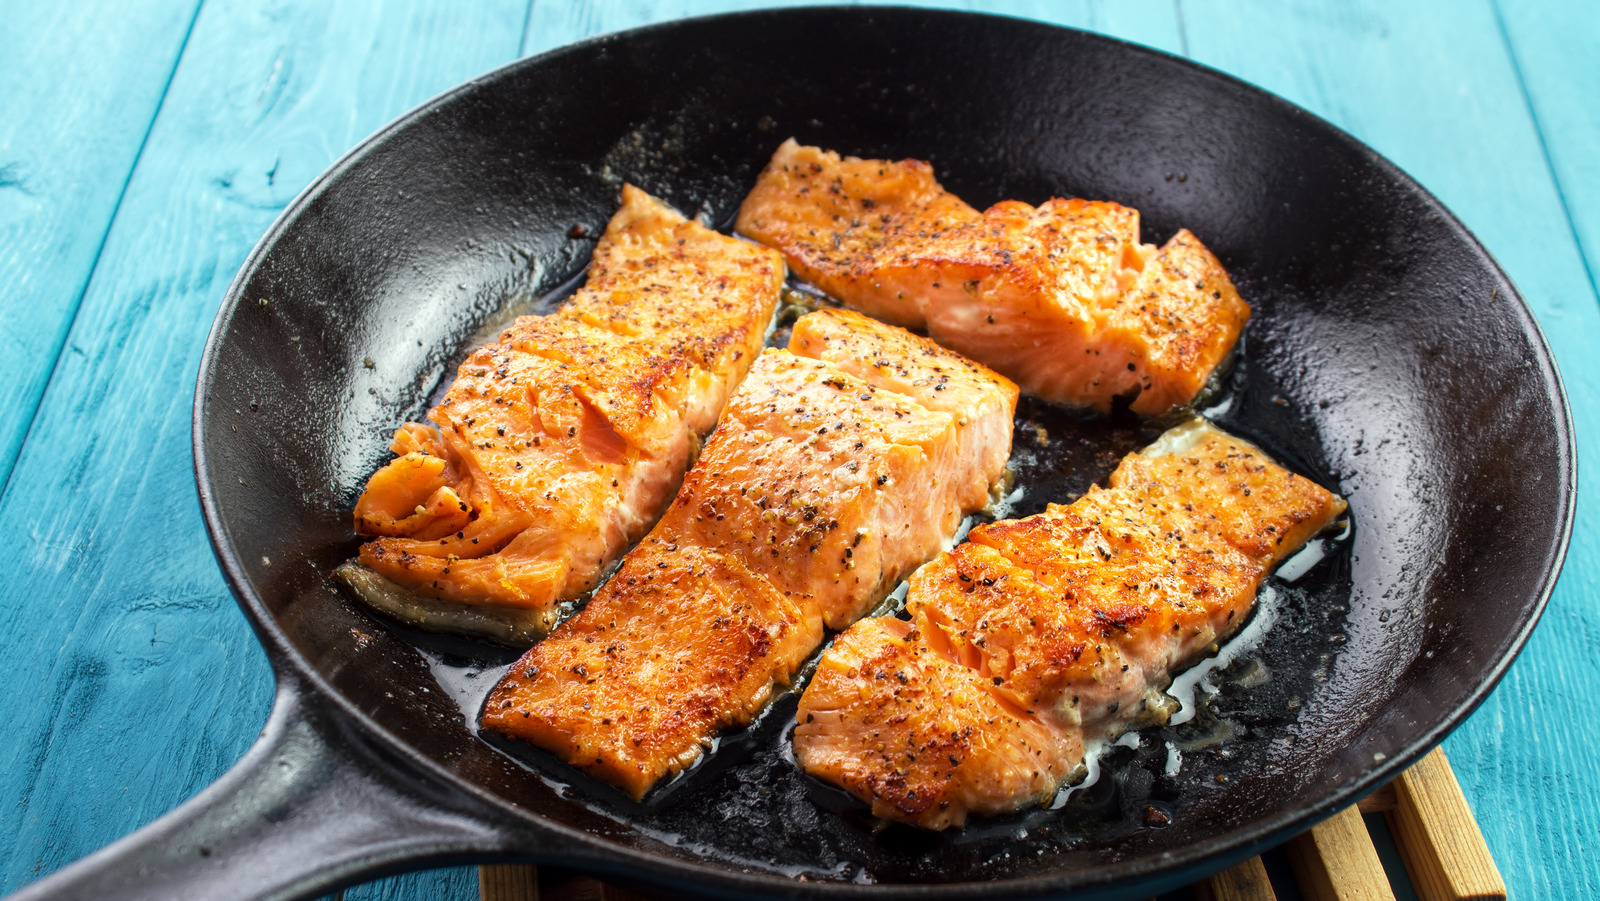 Butter or oil: which is better for salmon?